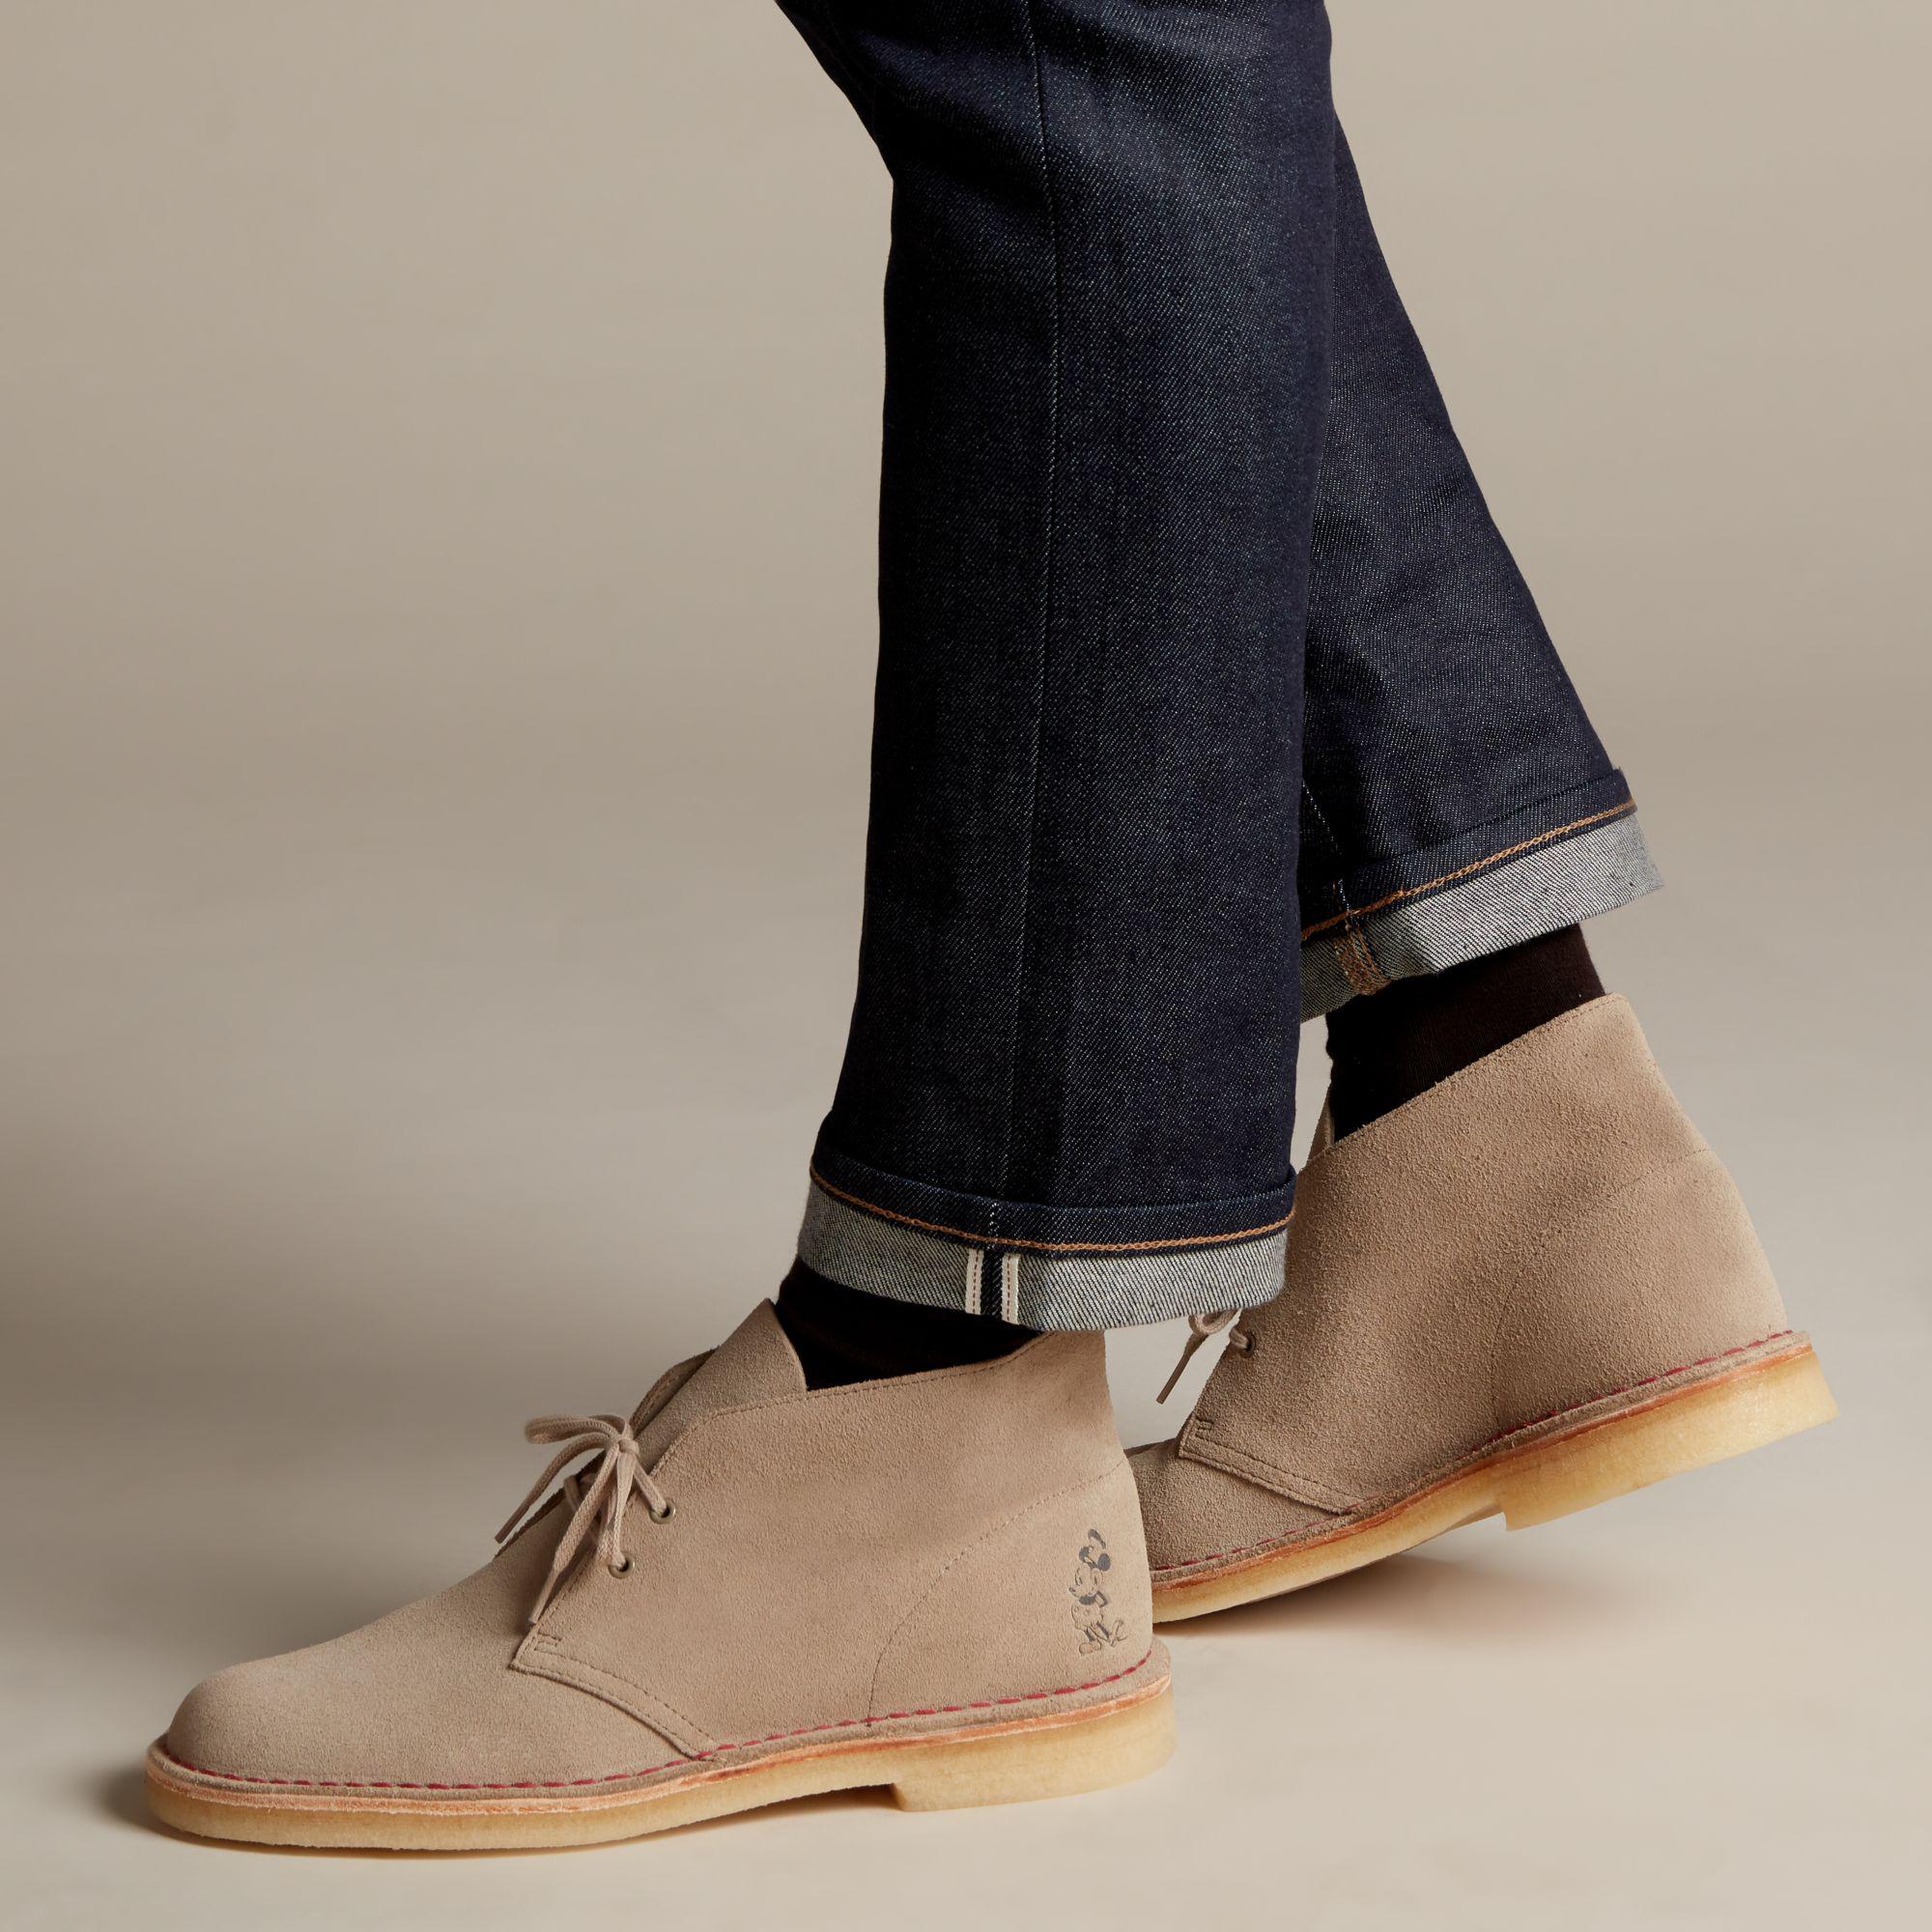 How The Clarks Desert Boot Balances Heritage With